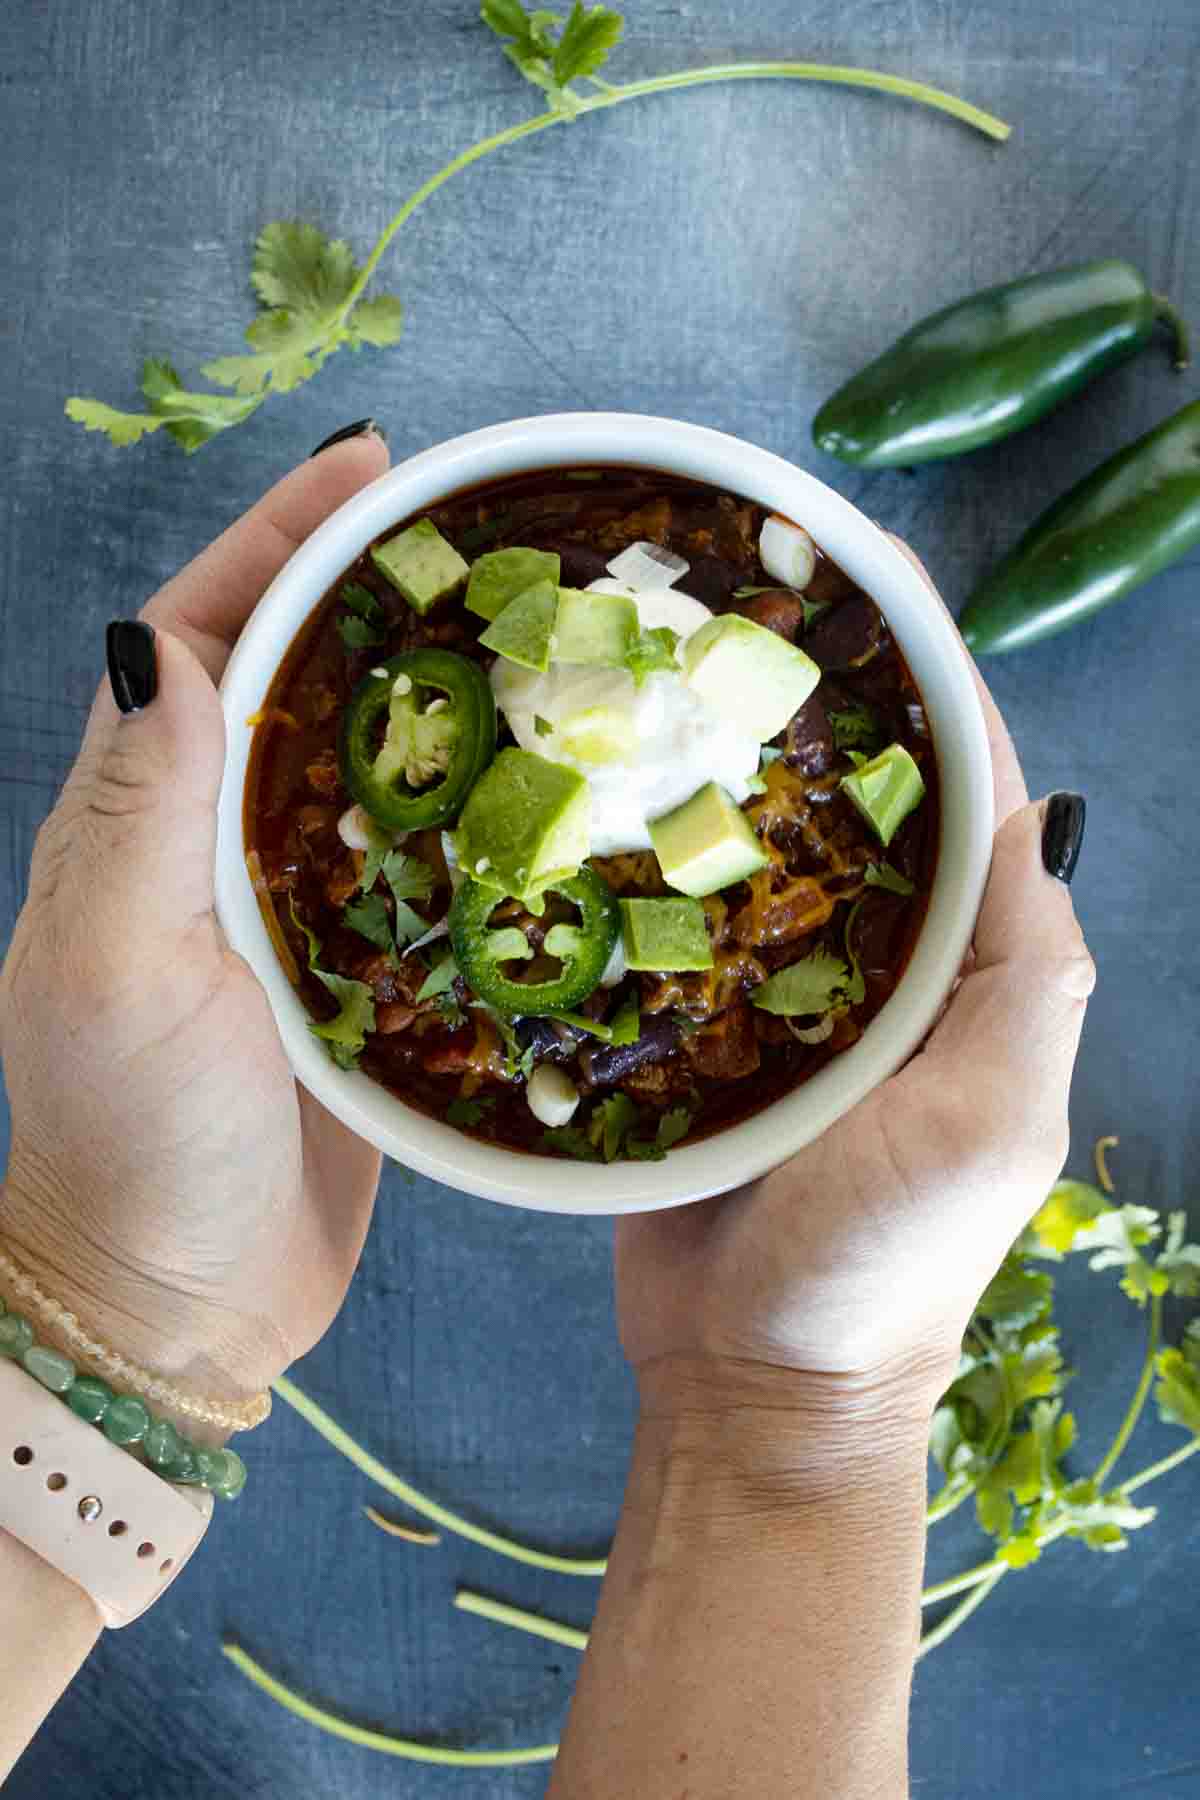 15 Best Crock-Pot Recipes for Two - Slow Cooker Dinners for Two